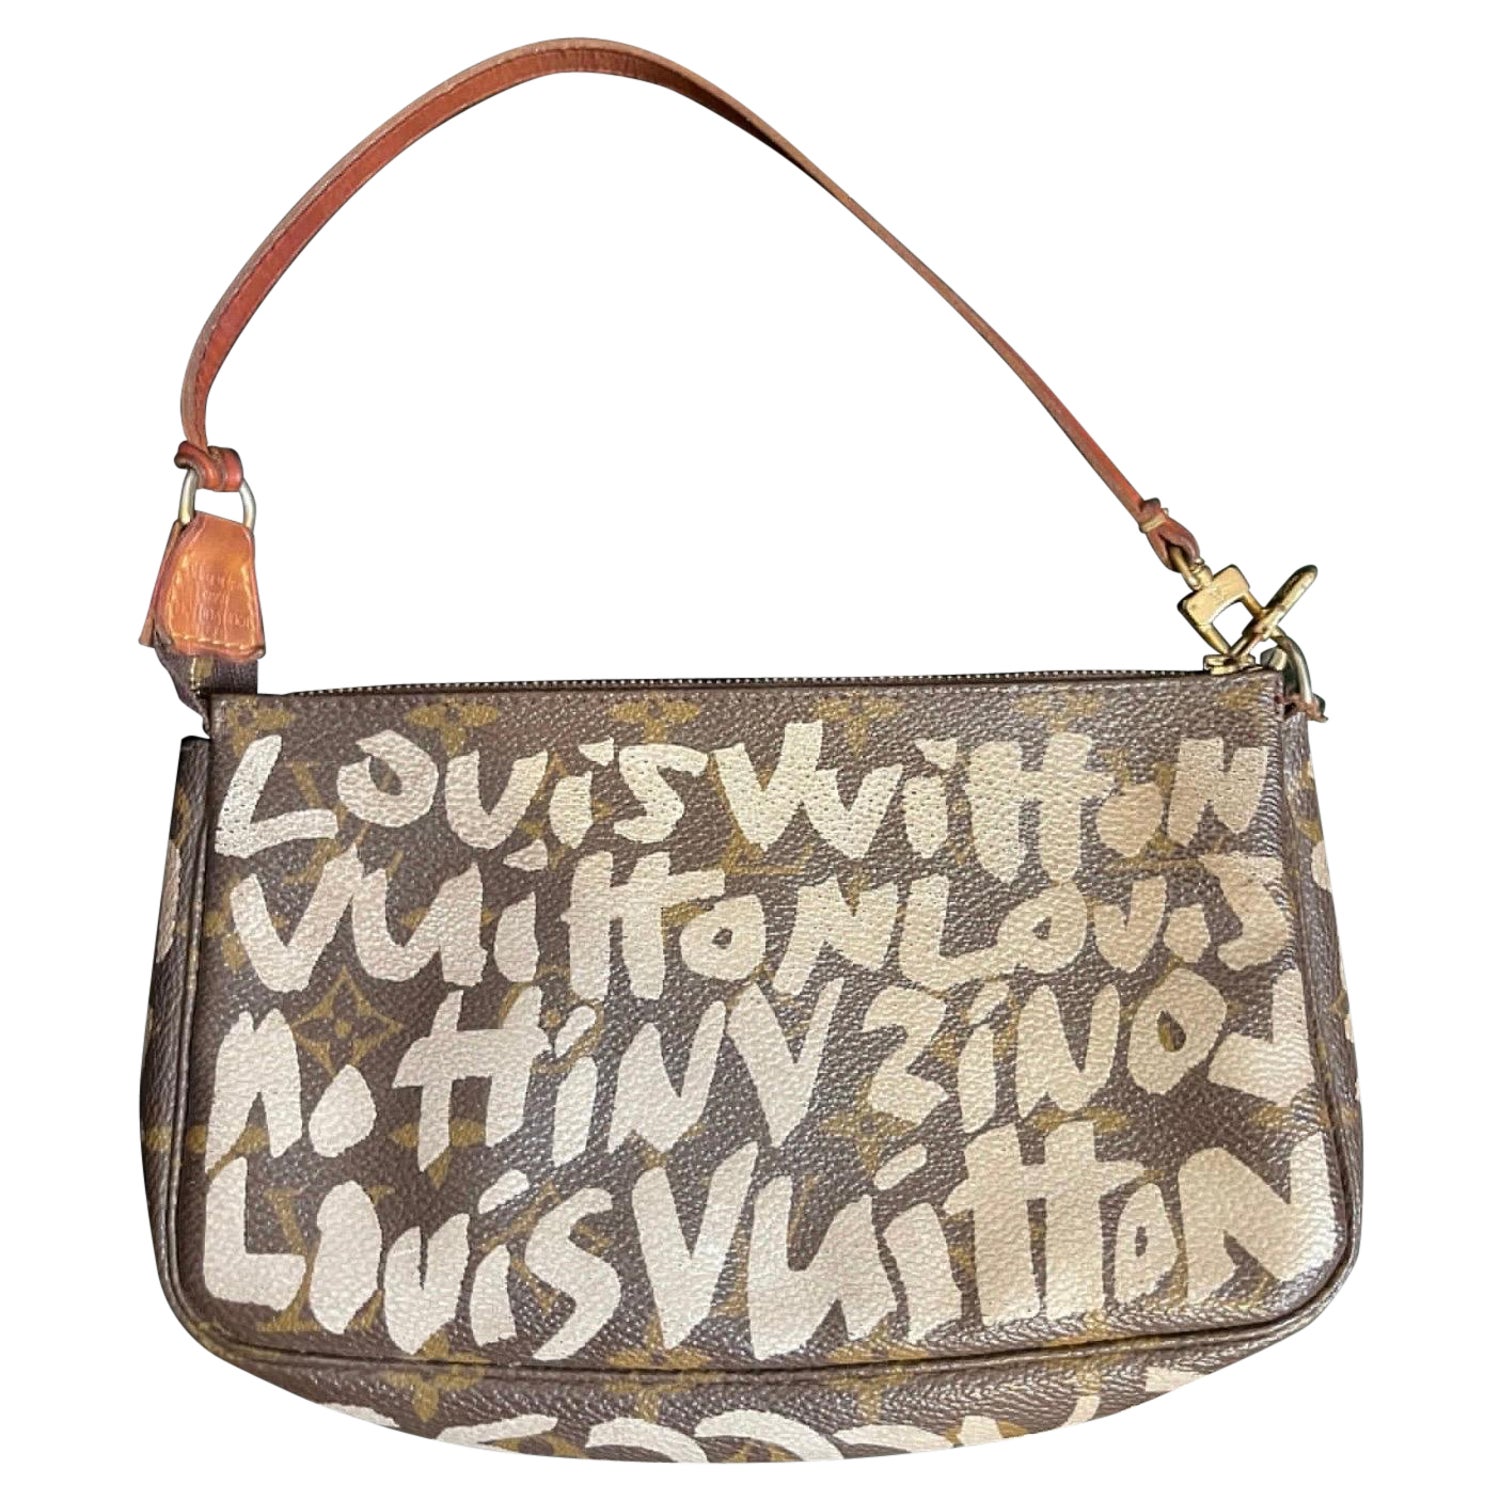 Louis Vuitton Bag With Writing On It - For Sale on 1stDibs